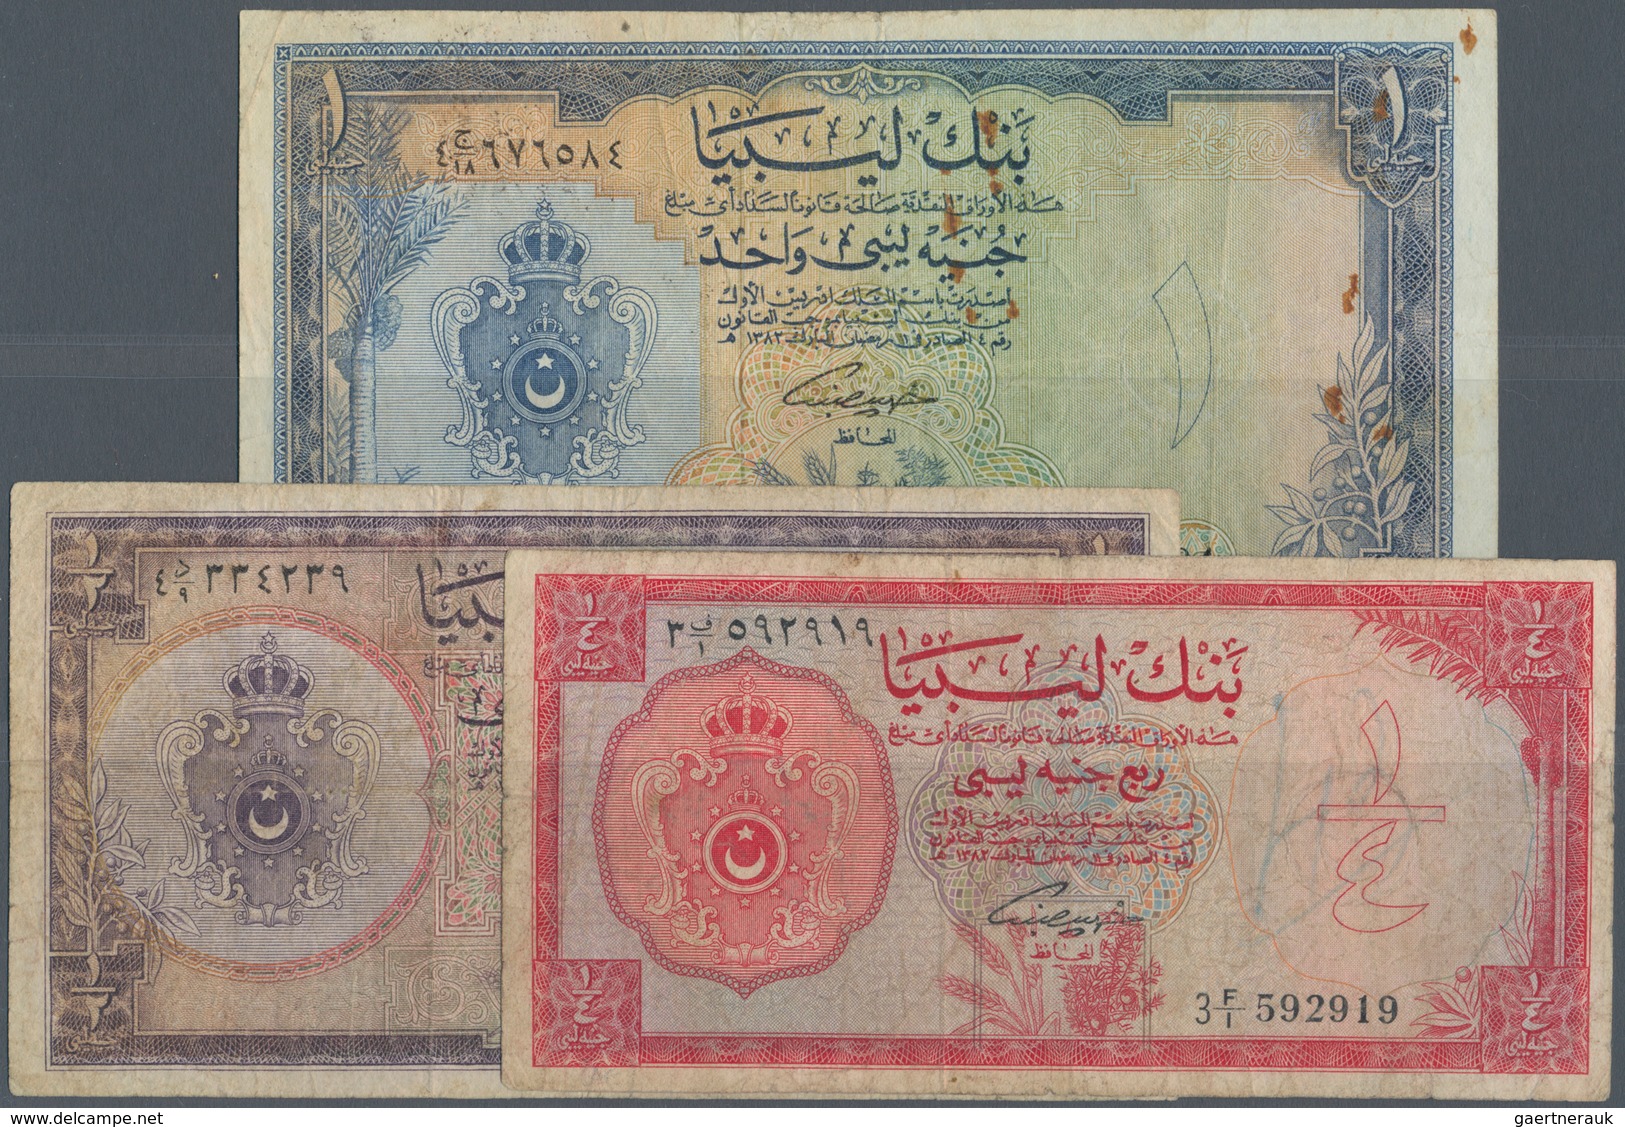 Libya / Libyen: Set Of 3 Notes Containing ¼, ½ And 1 Pound L.1963 P. 23-35, All Used With Folds And - Libyen